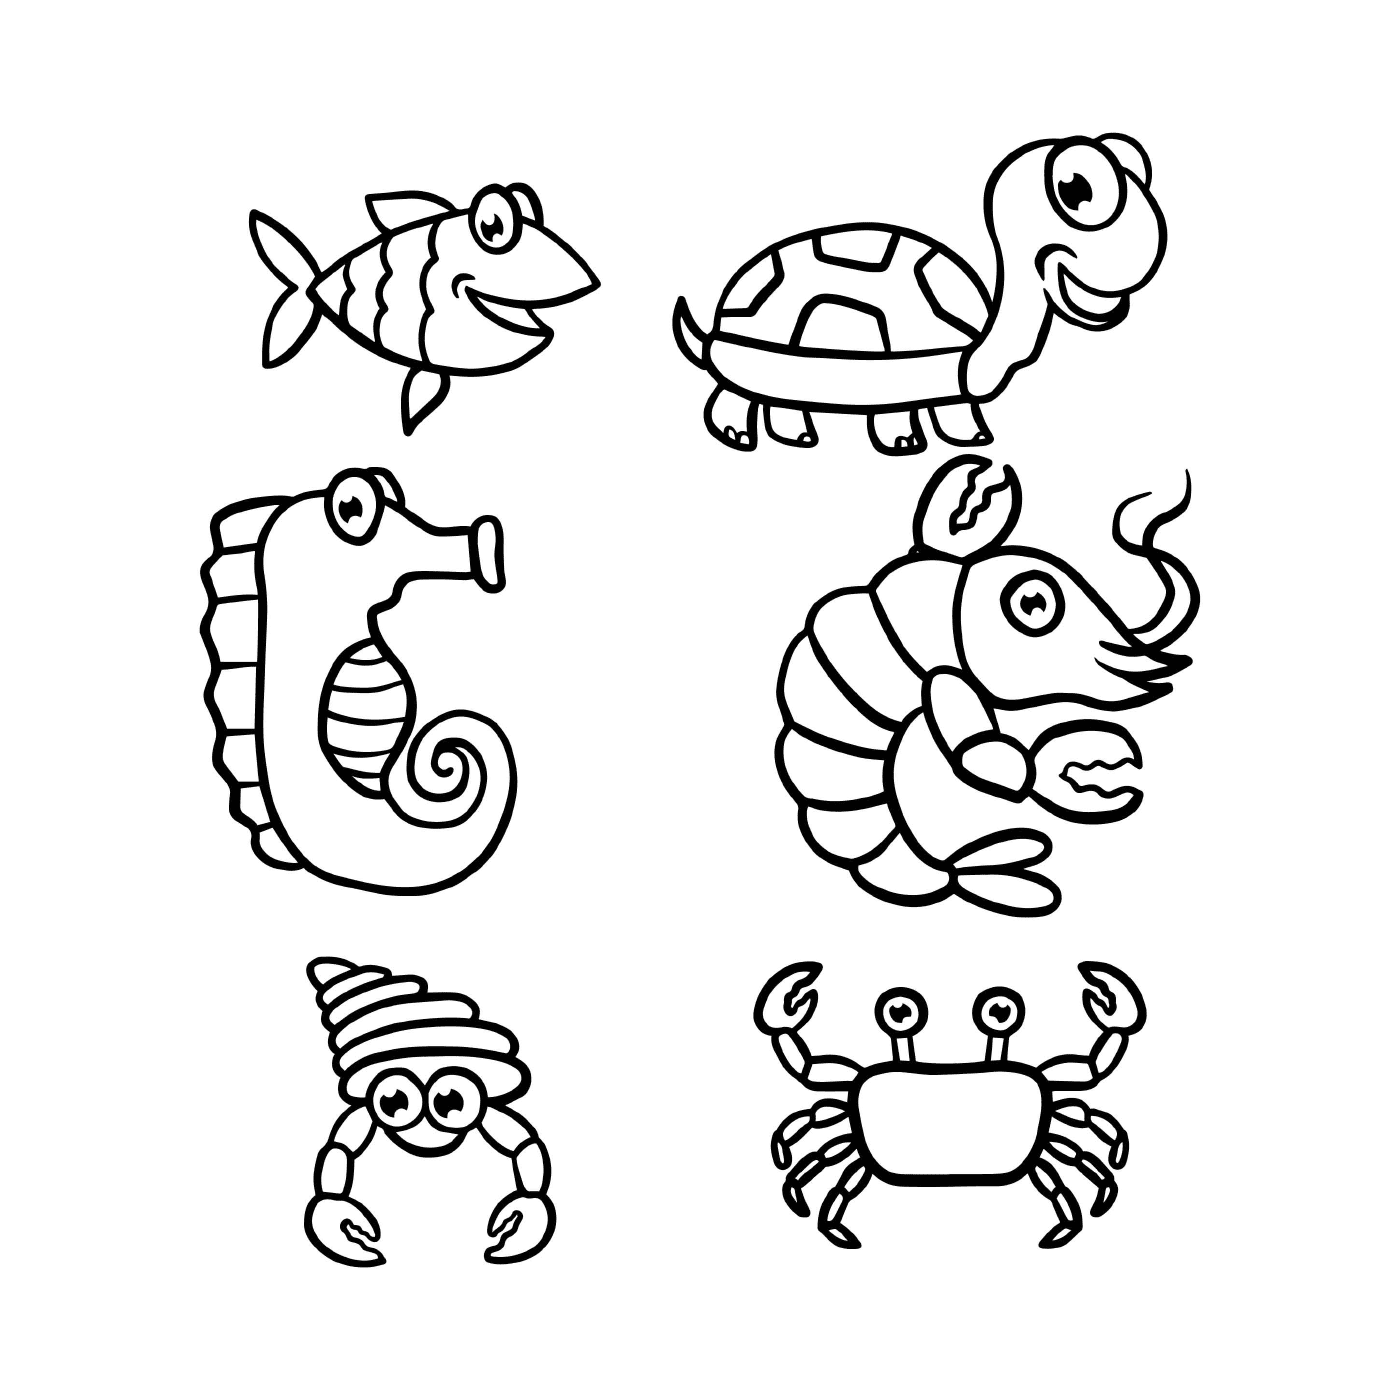  a group of marine and aquatic animals 